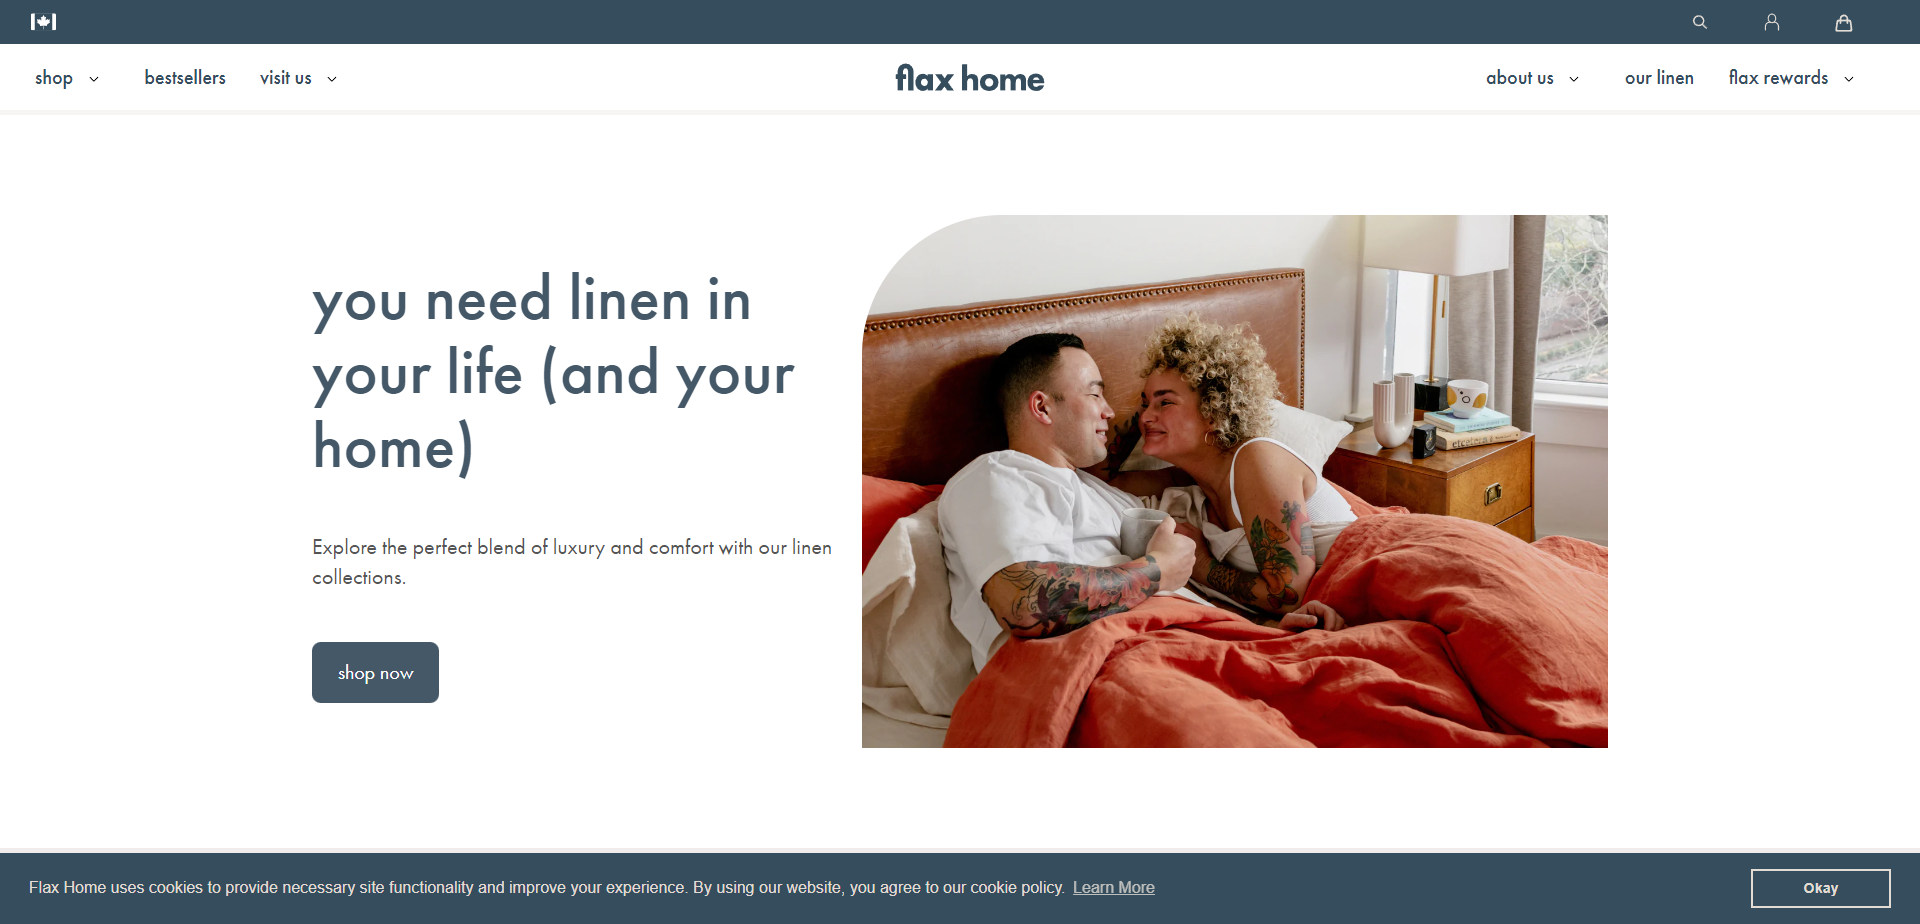 Referral Landing Page for Flax Home